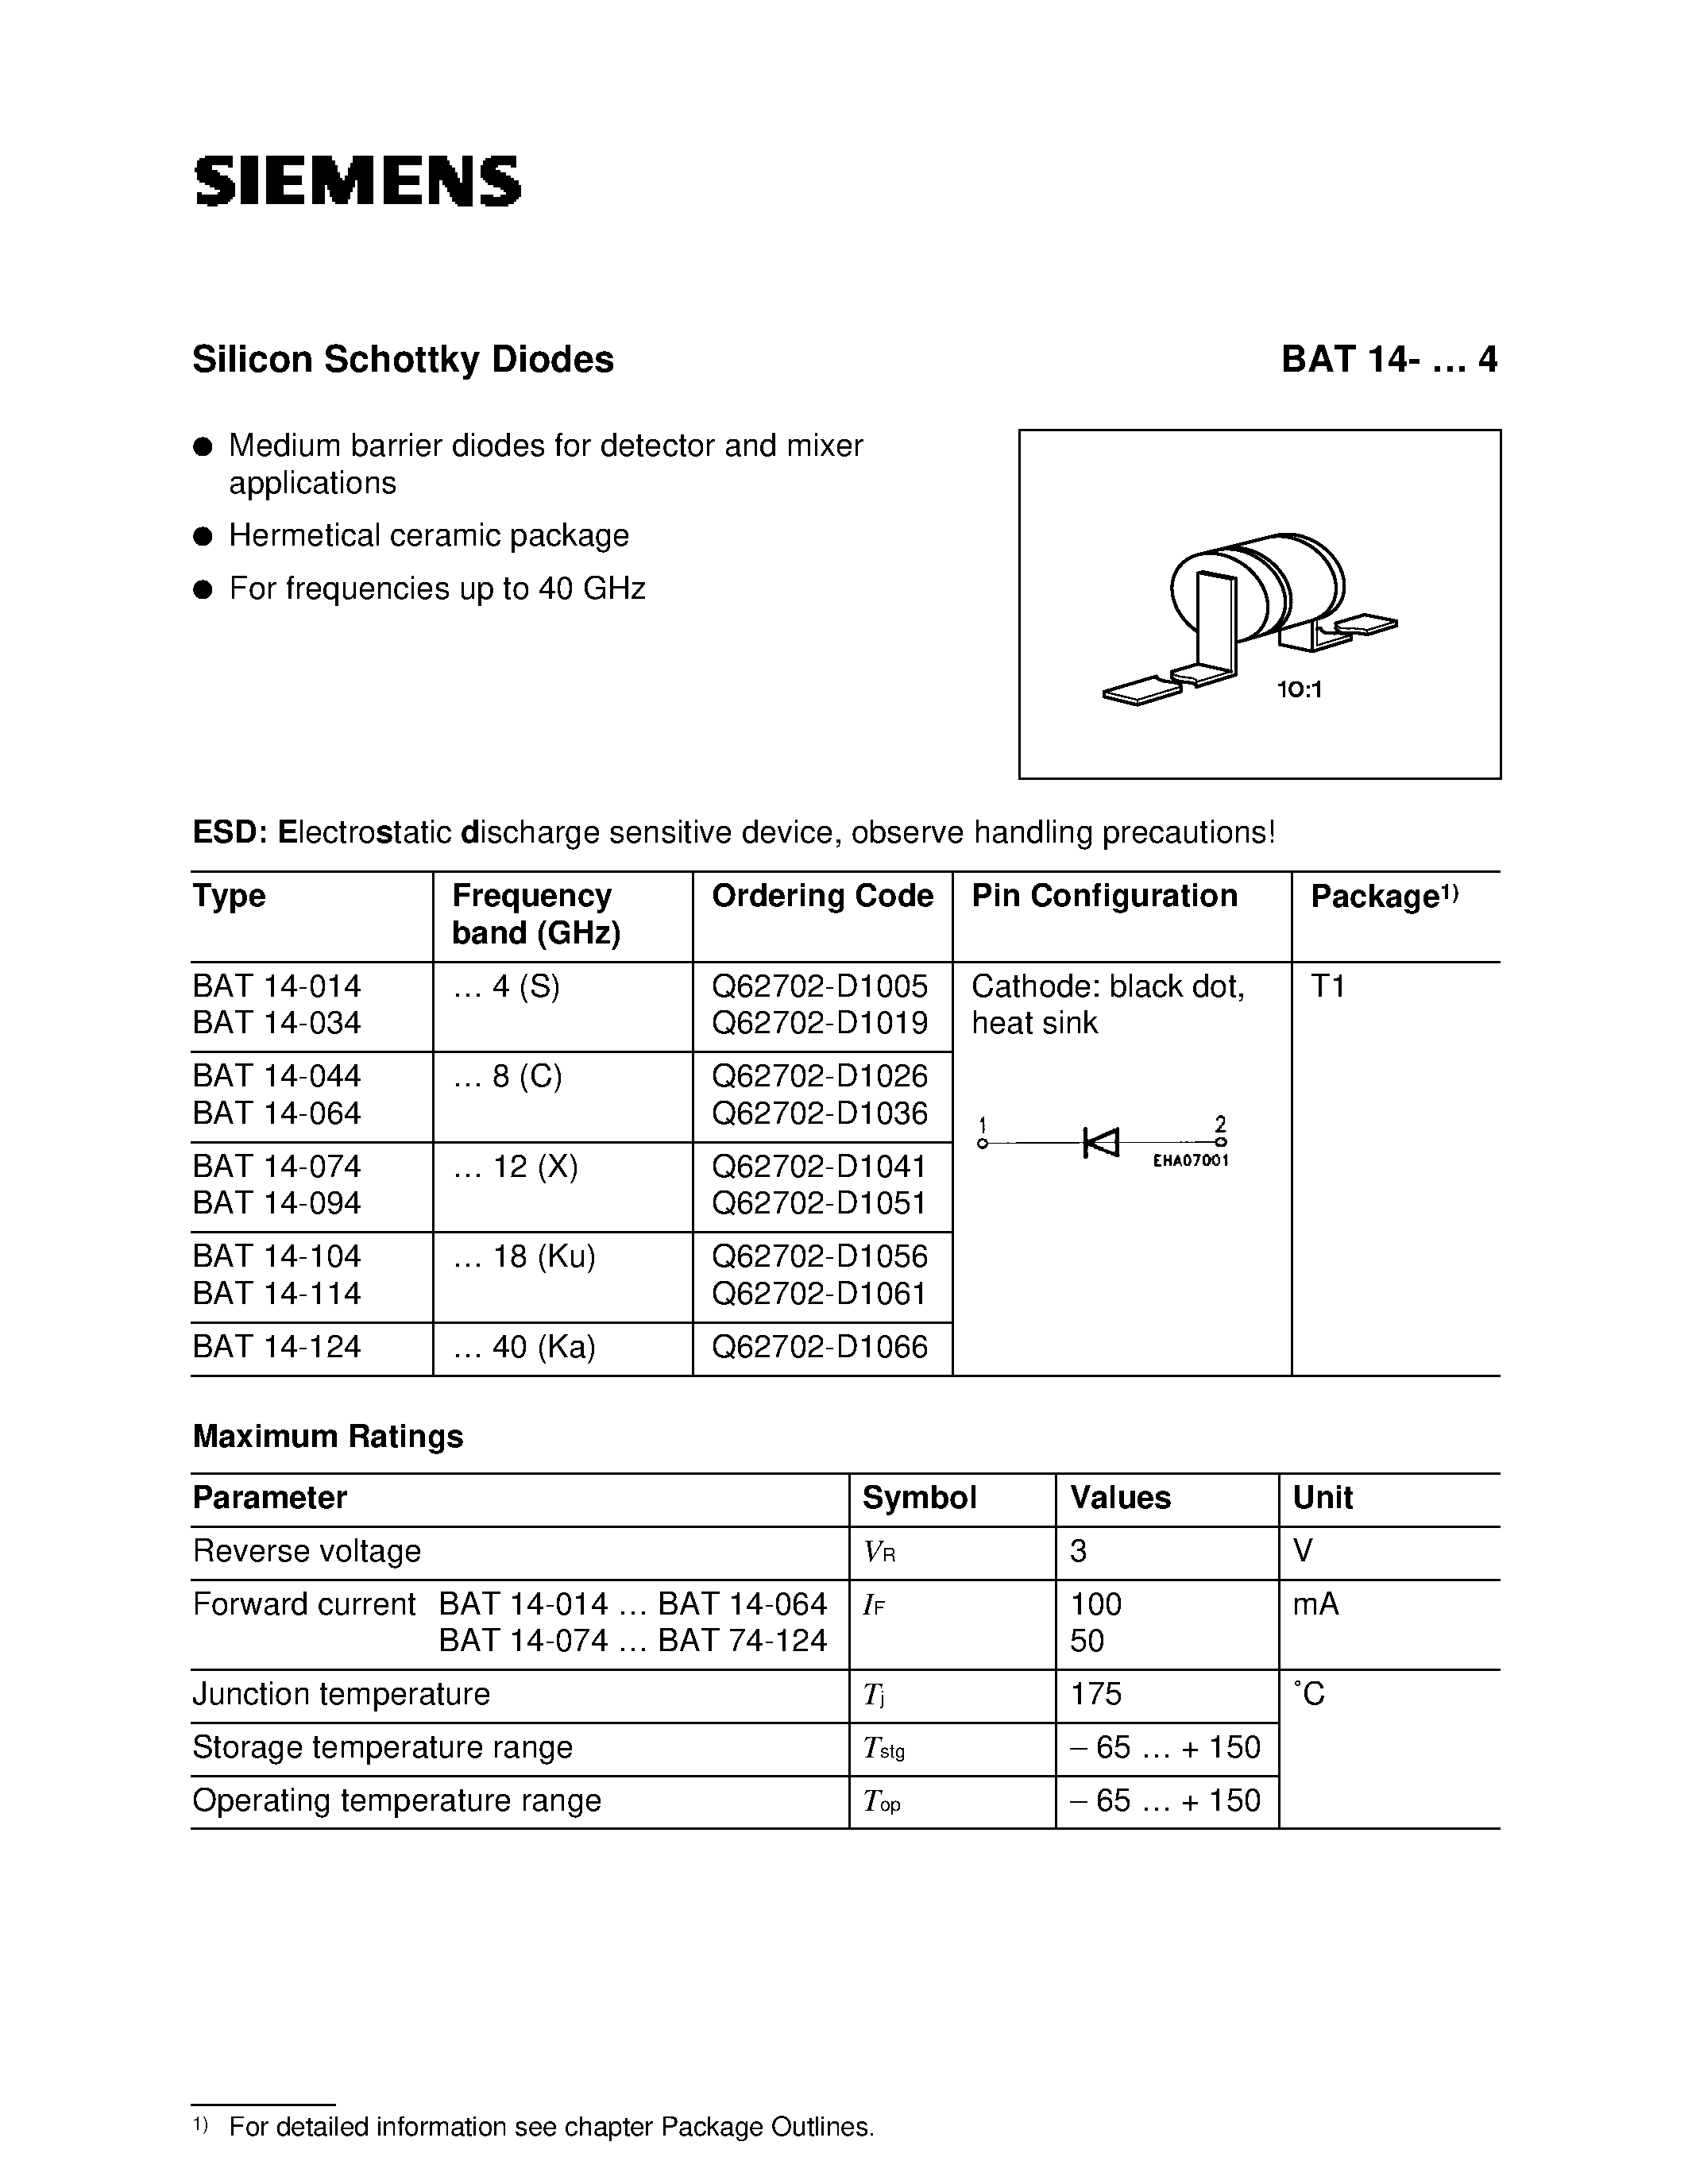 Datasheet BAT14-014 - HiRel Silicon Schottky Diode (HiRel Discrete and Microwave Semiconductor Medium barrier diodes for detector and mixer applications) page 1